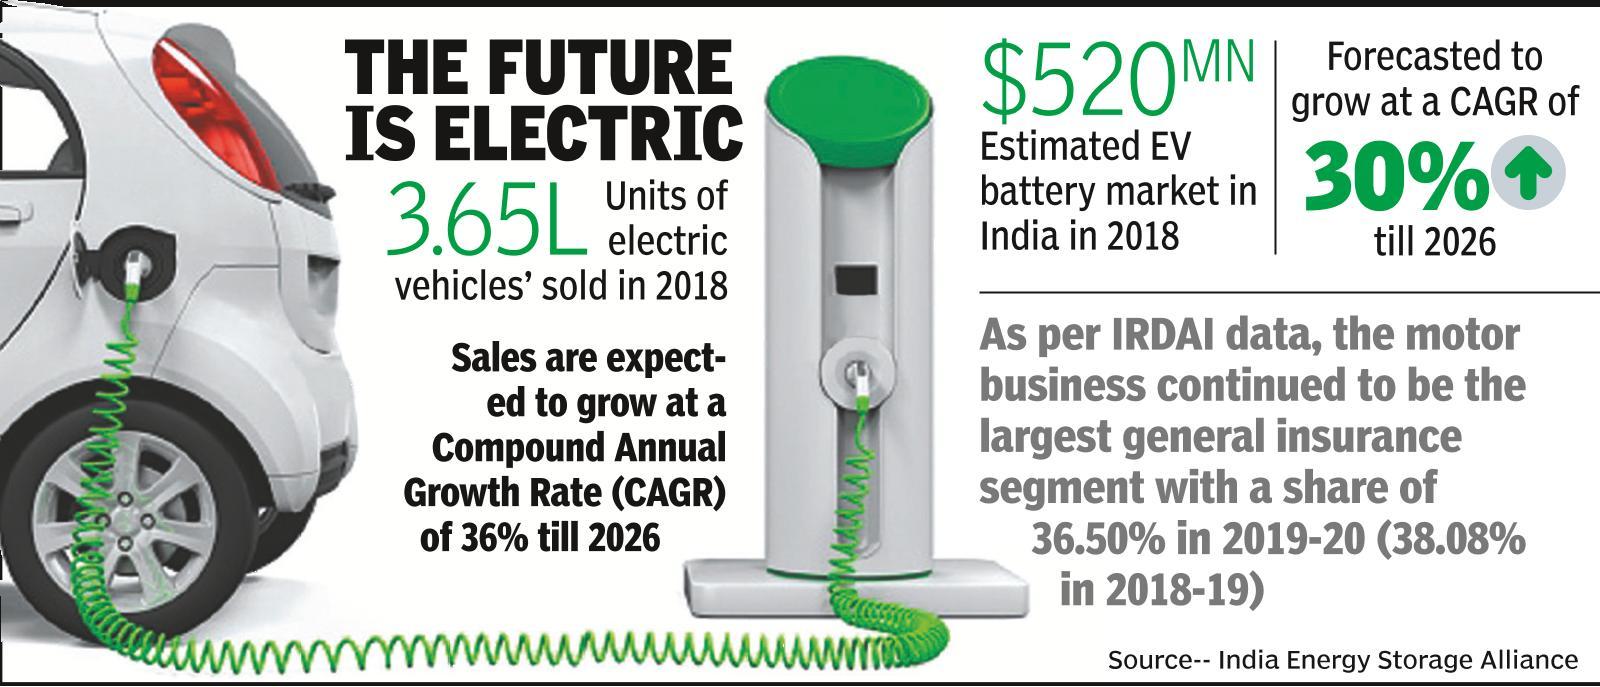 As sales grow, insurers rev up for electric vehicle segment